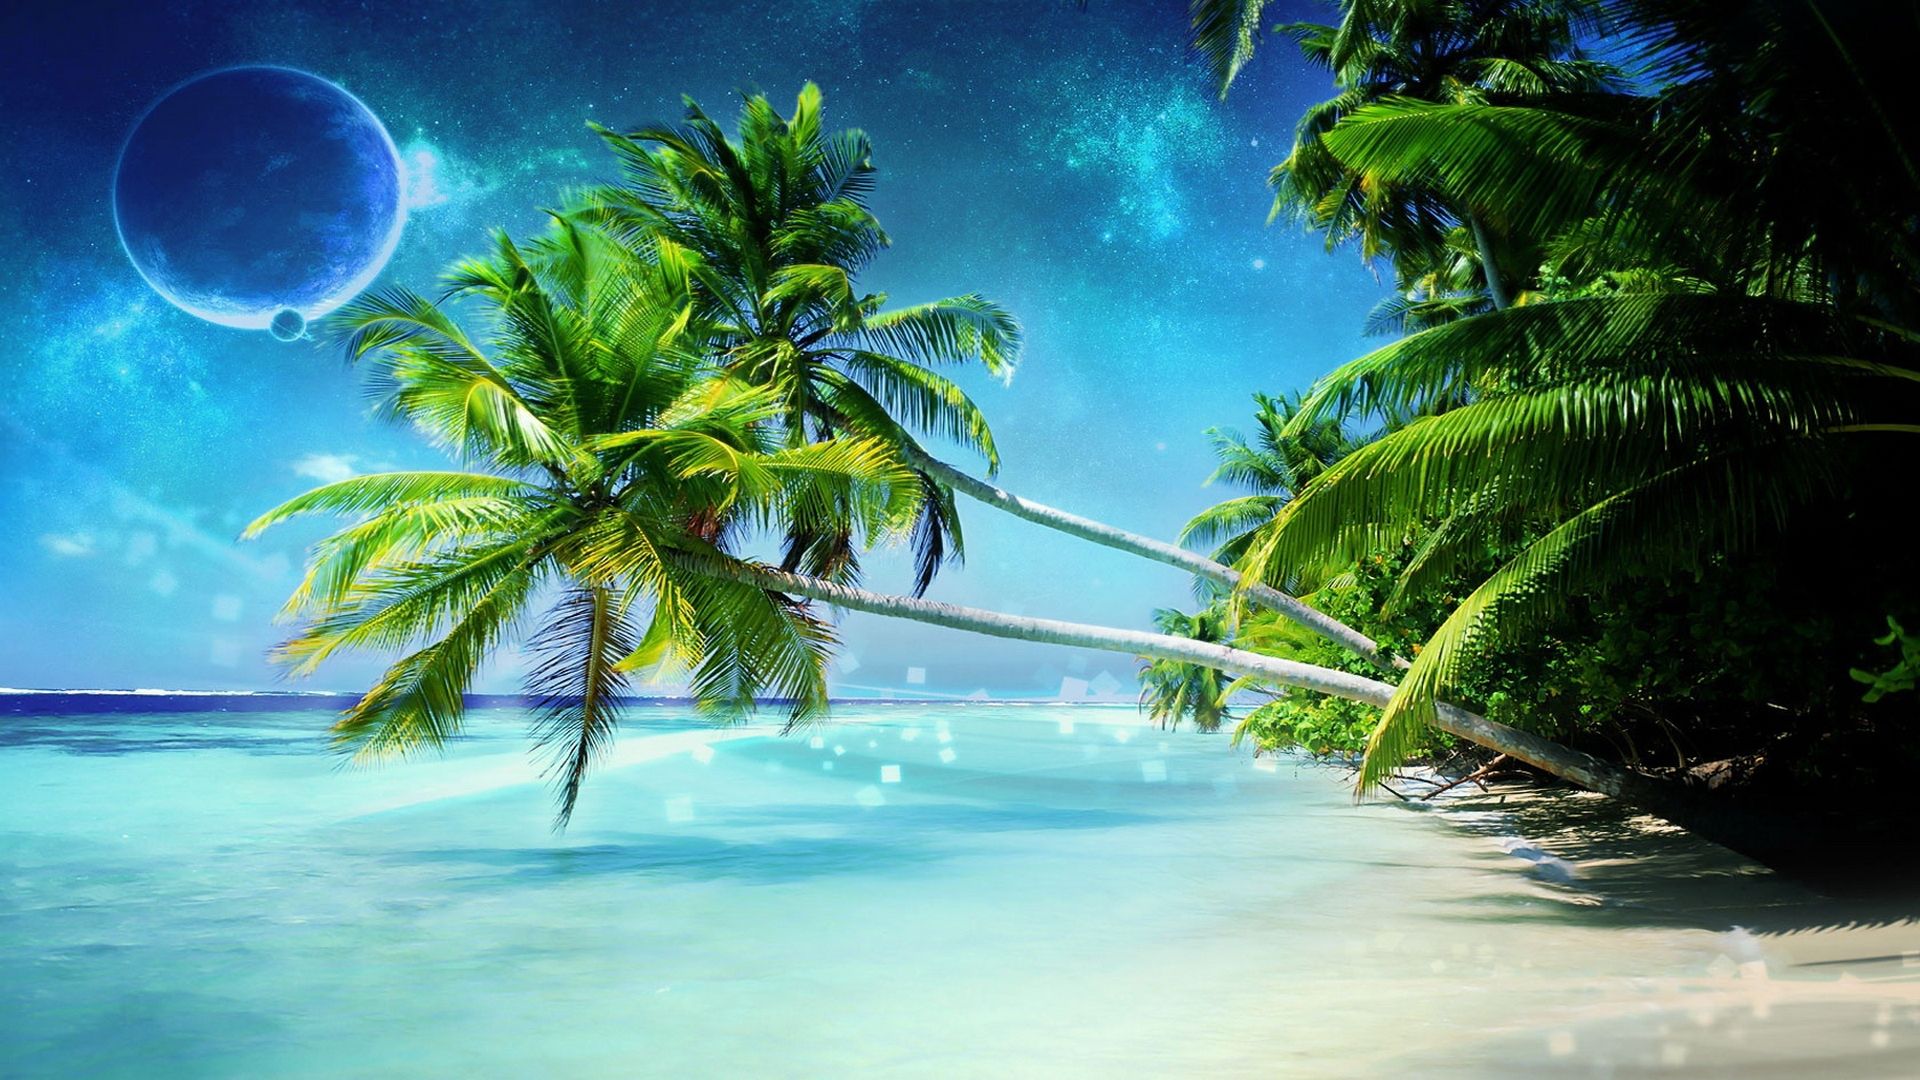 HD wallpaper, 13293, Beach, Animated, Pictures